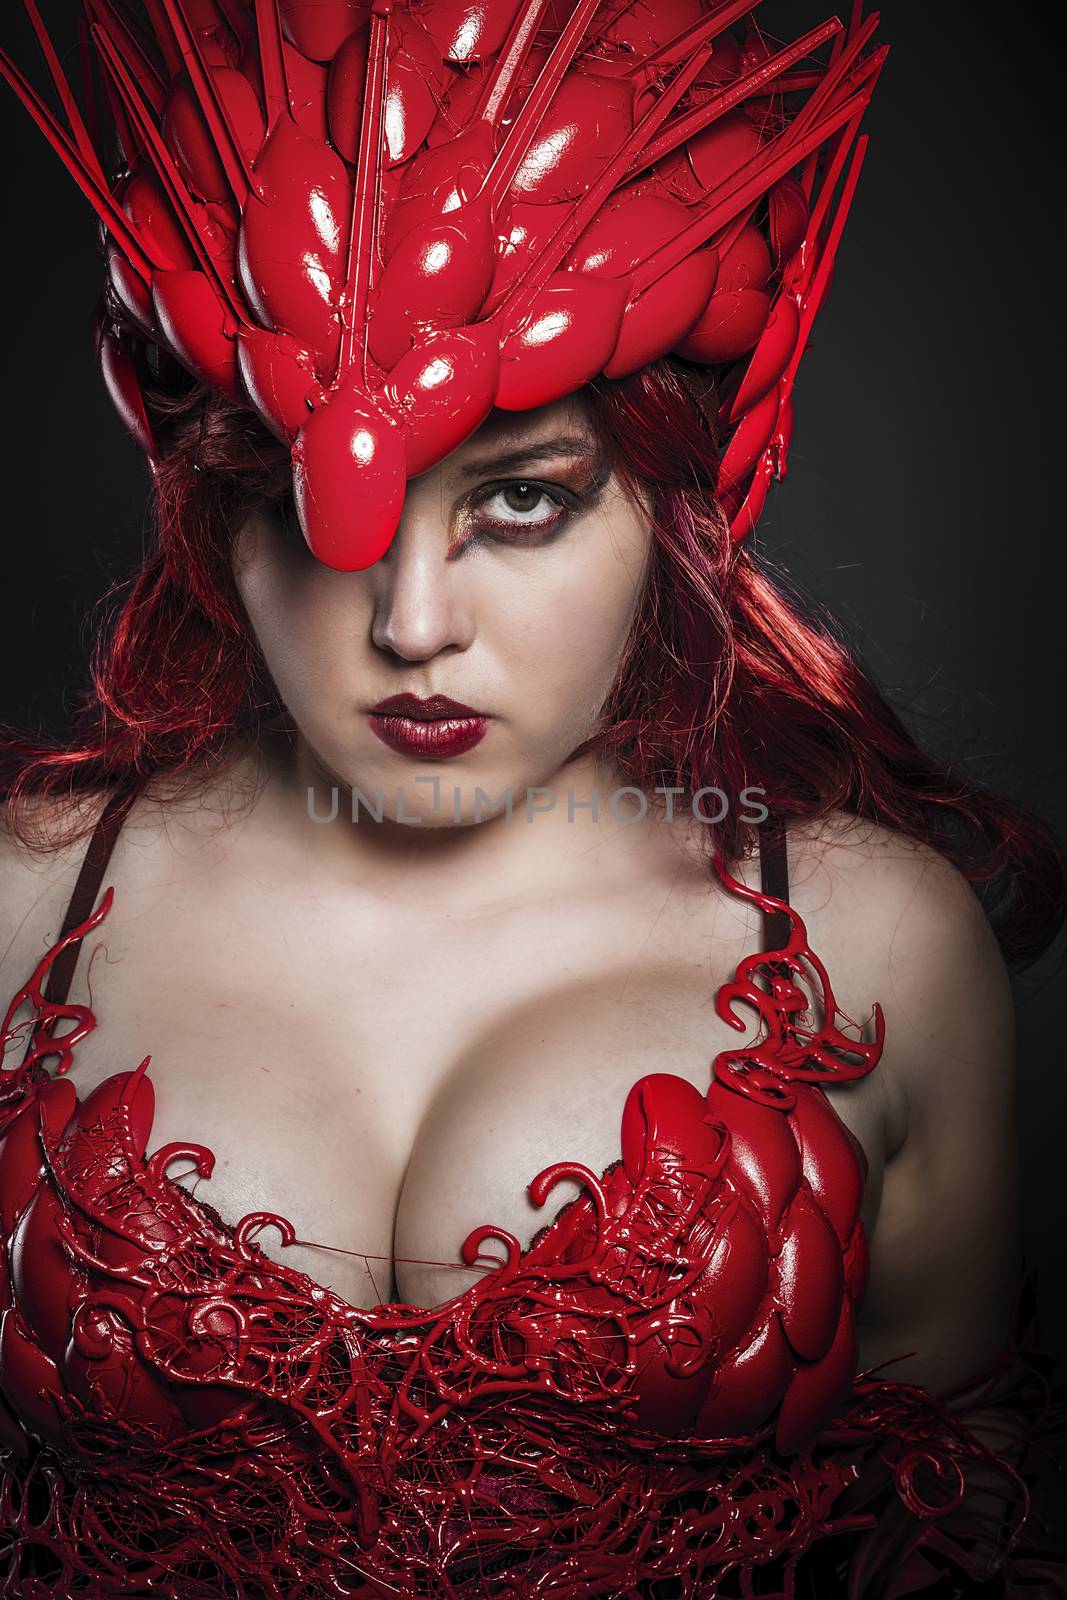 Red armor, sensual girl with dragon style fashion costume by FernandoCortes